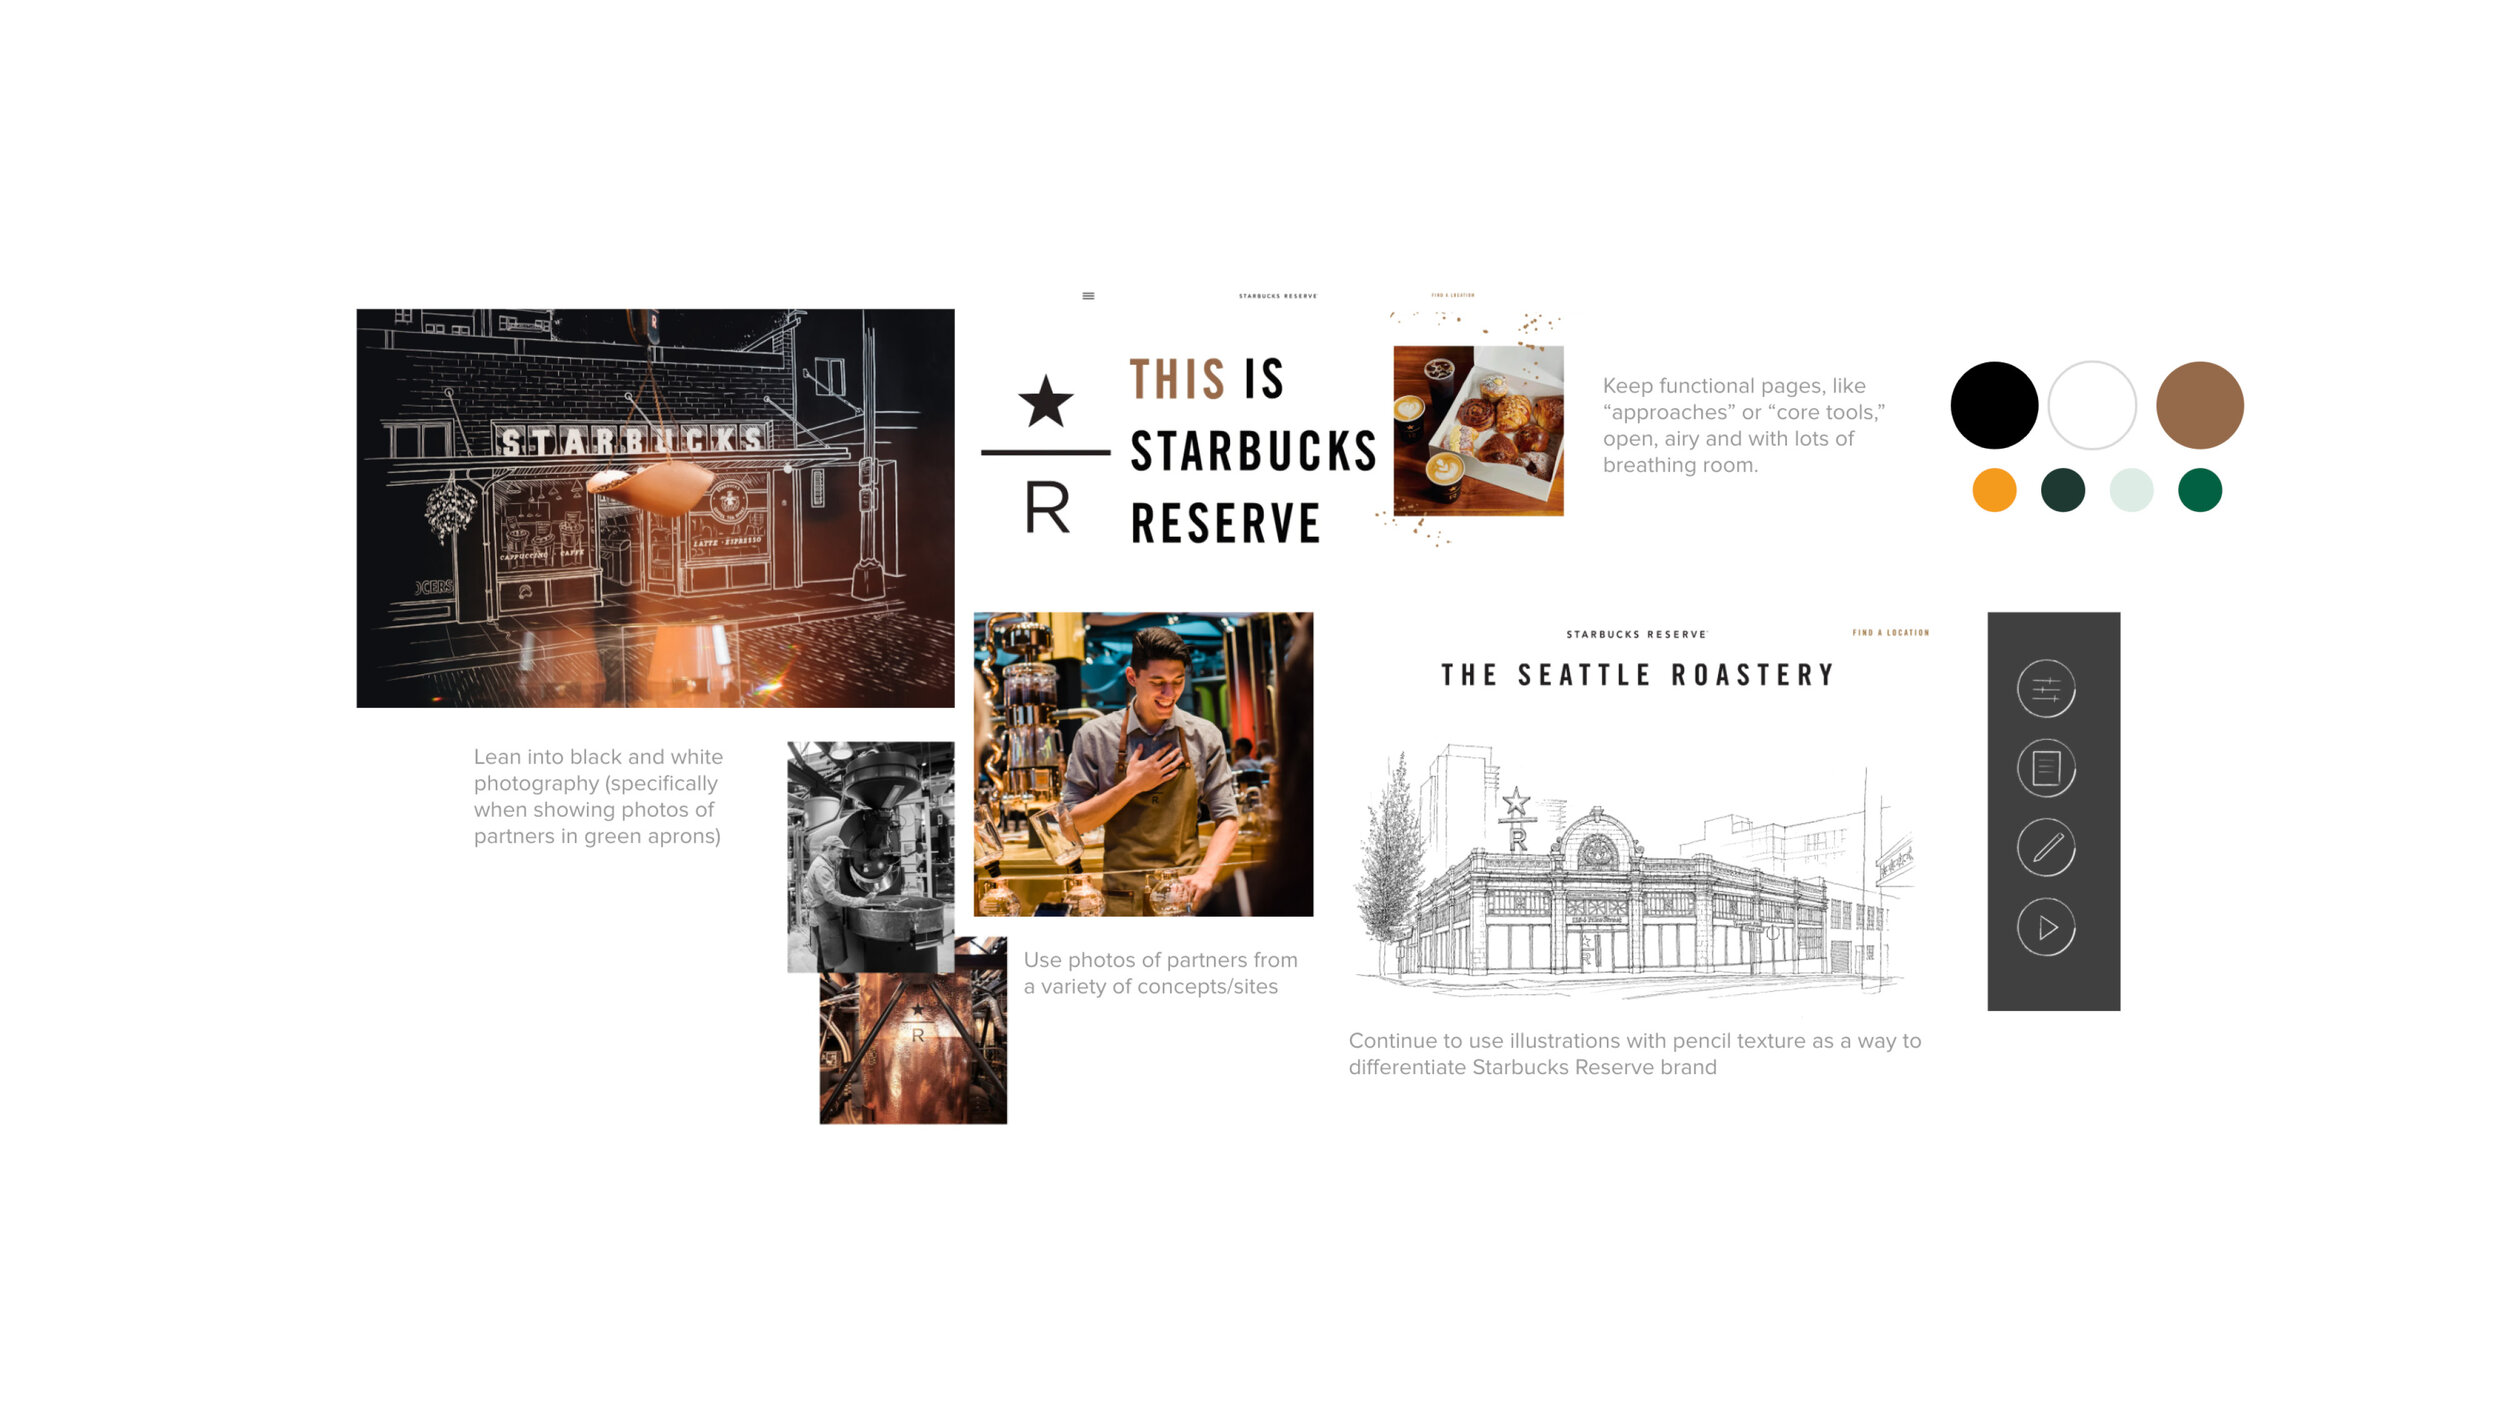 The creative approach focused on merging three brands (Starbucks, Starbucks Reserve and Princi) into one tool.